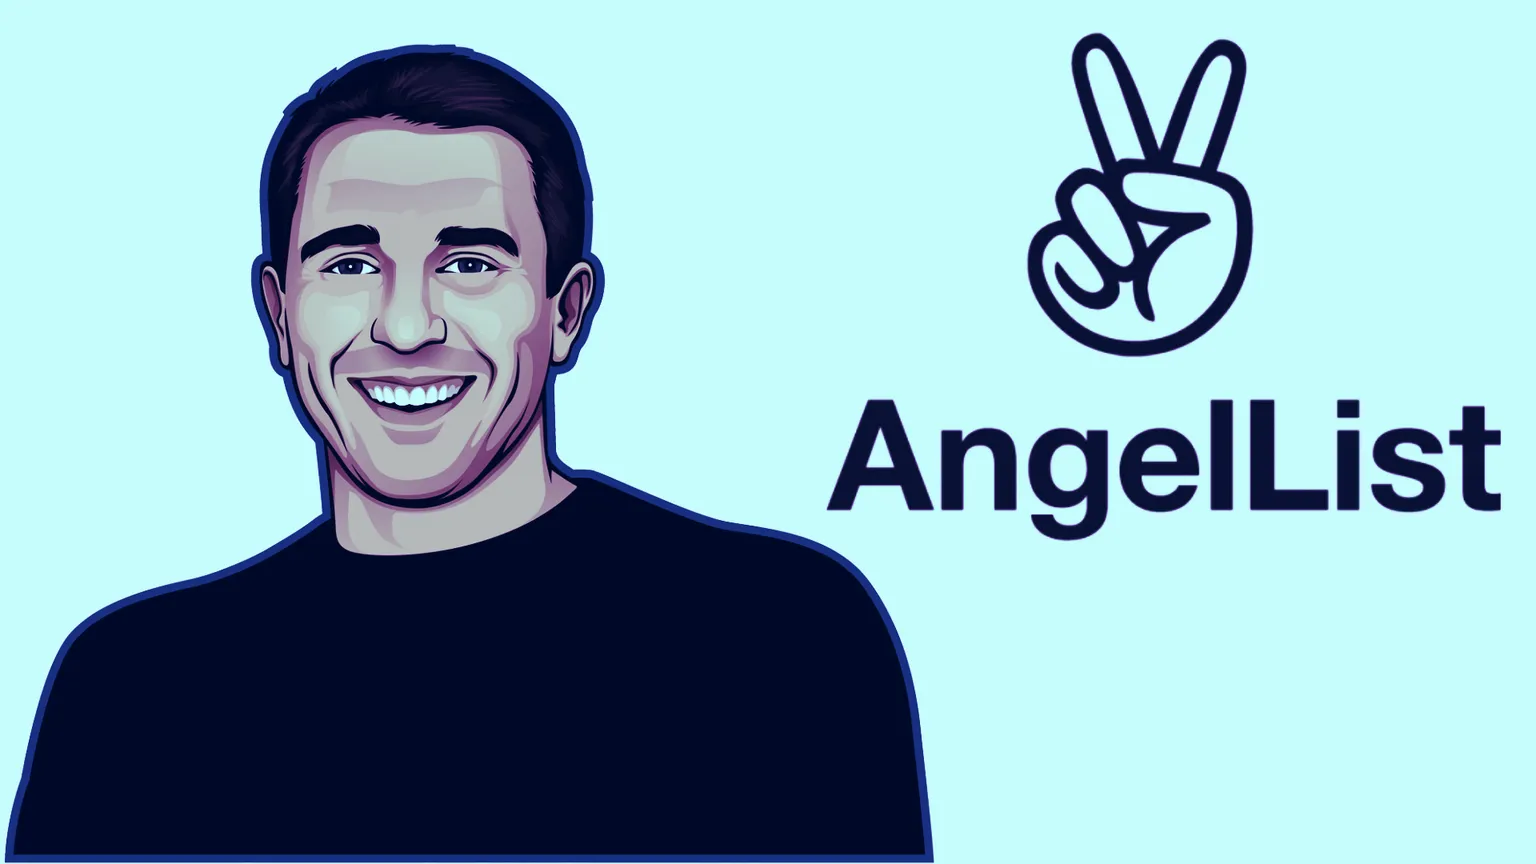 Anthony Pompliano has a new venture fund